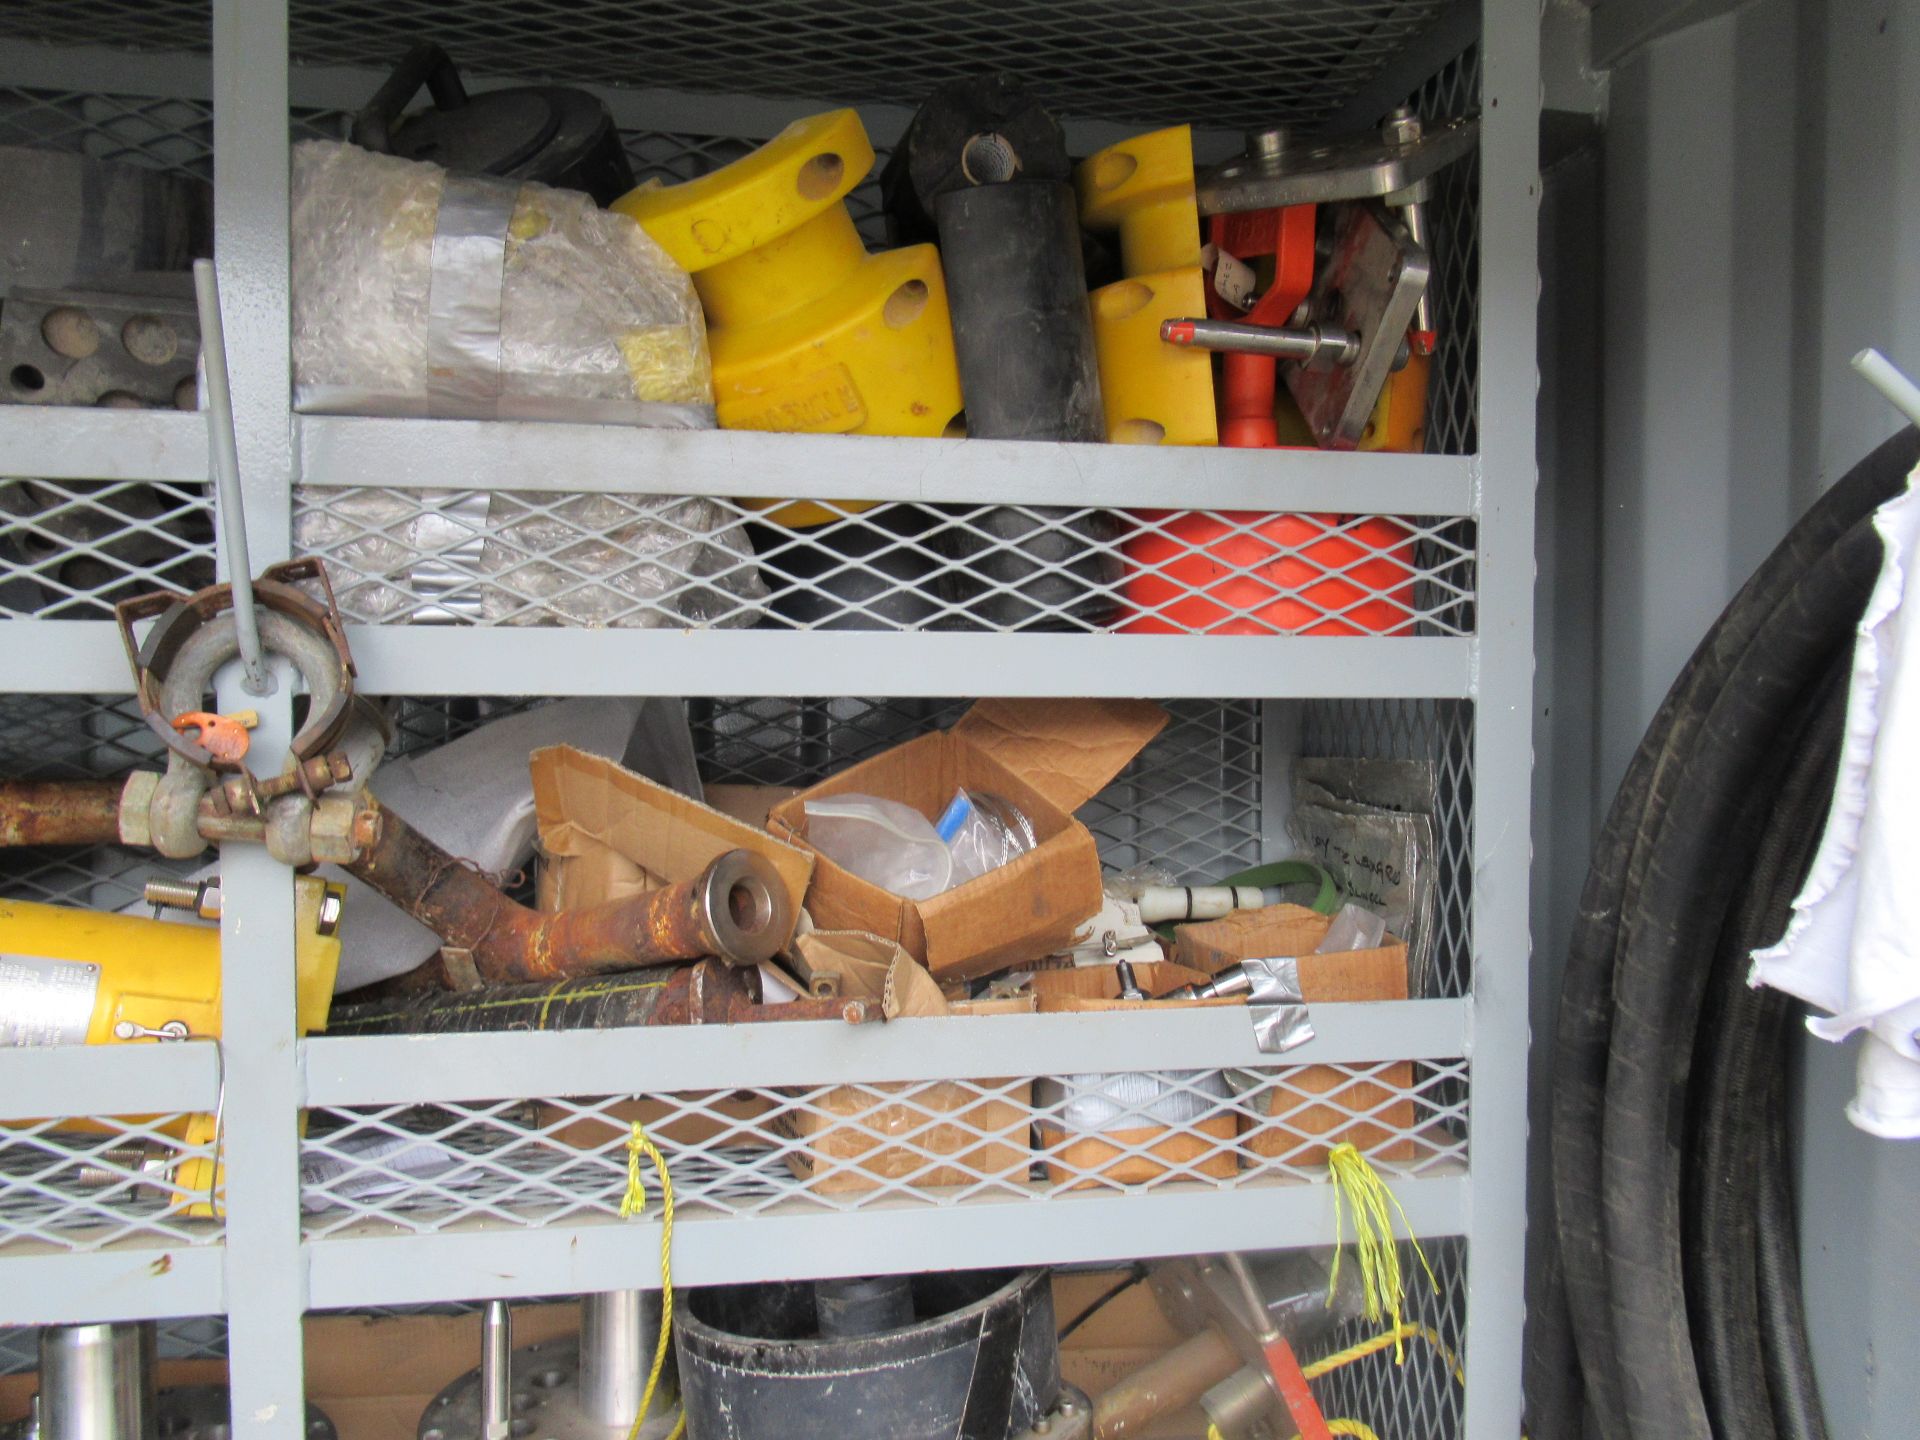 LOT CONSISTING OF 8’ X 4’ SEA CONTAINER AND CONTENTS, including subsea connectors and umbilical - Image 11 of 14